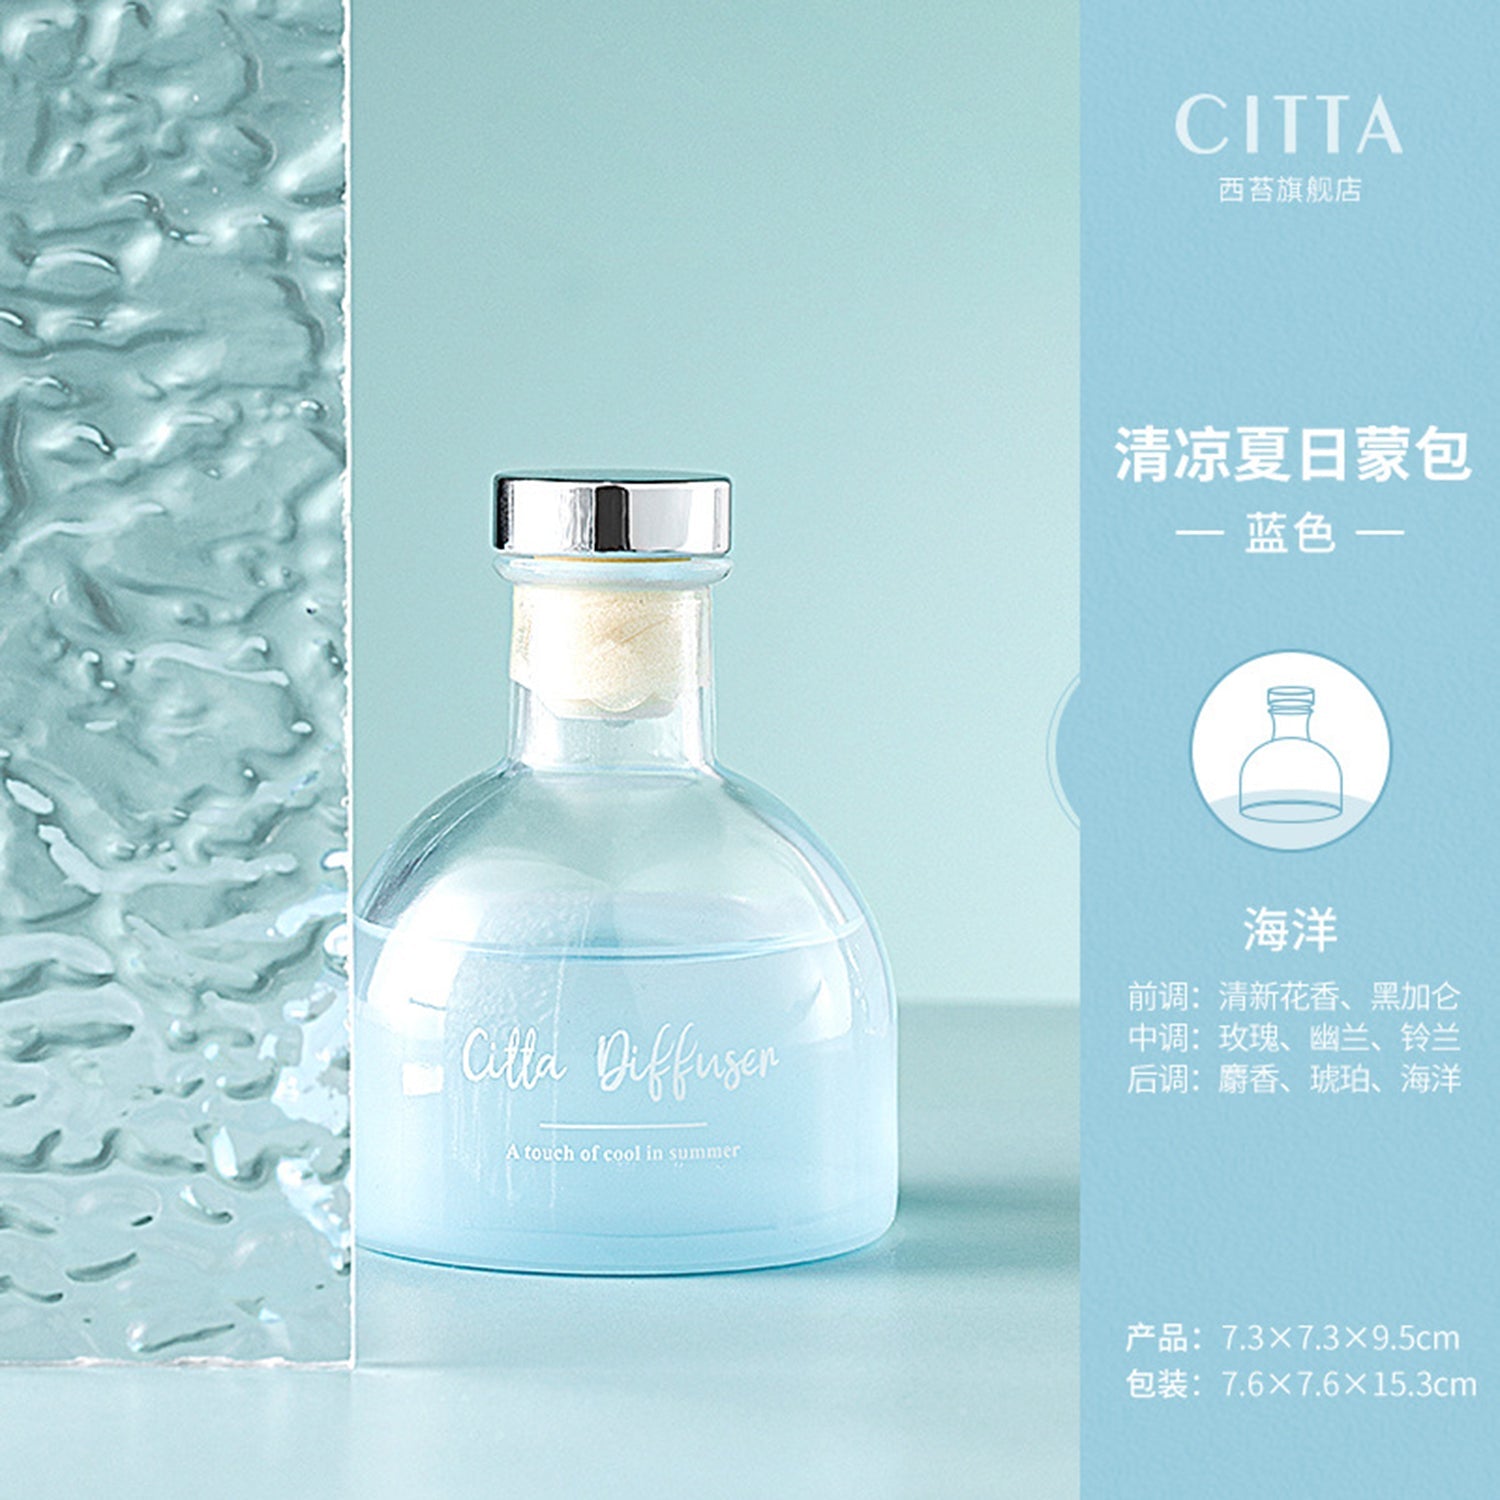 CITTA Cool Summer Series Reed Diffuser Aromatherapy 100ML Premium Essential Oil with Reed Stick Reed Diffuser CITTA Blue / Ocean 